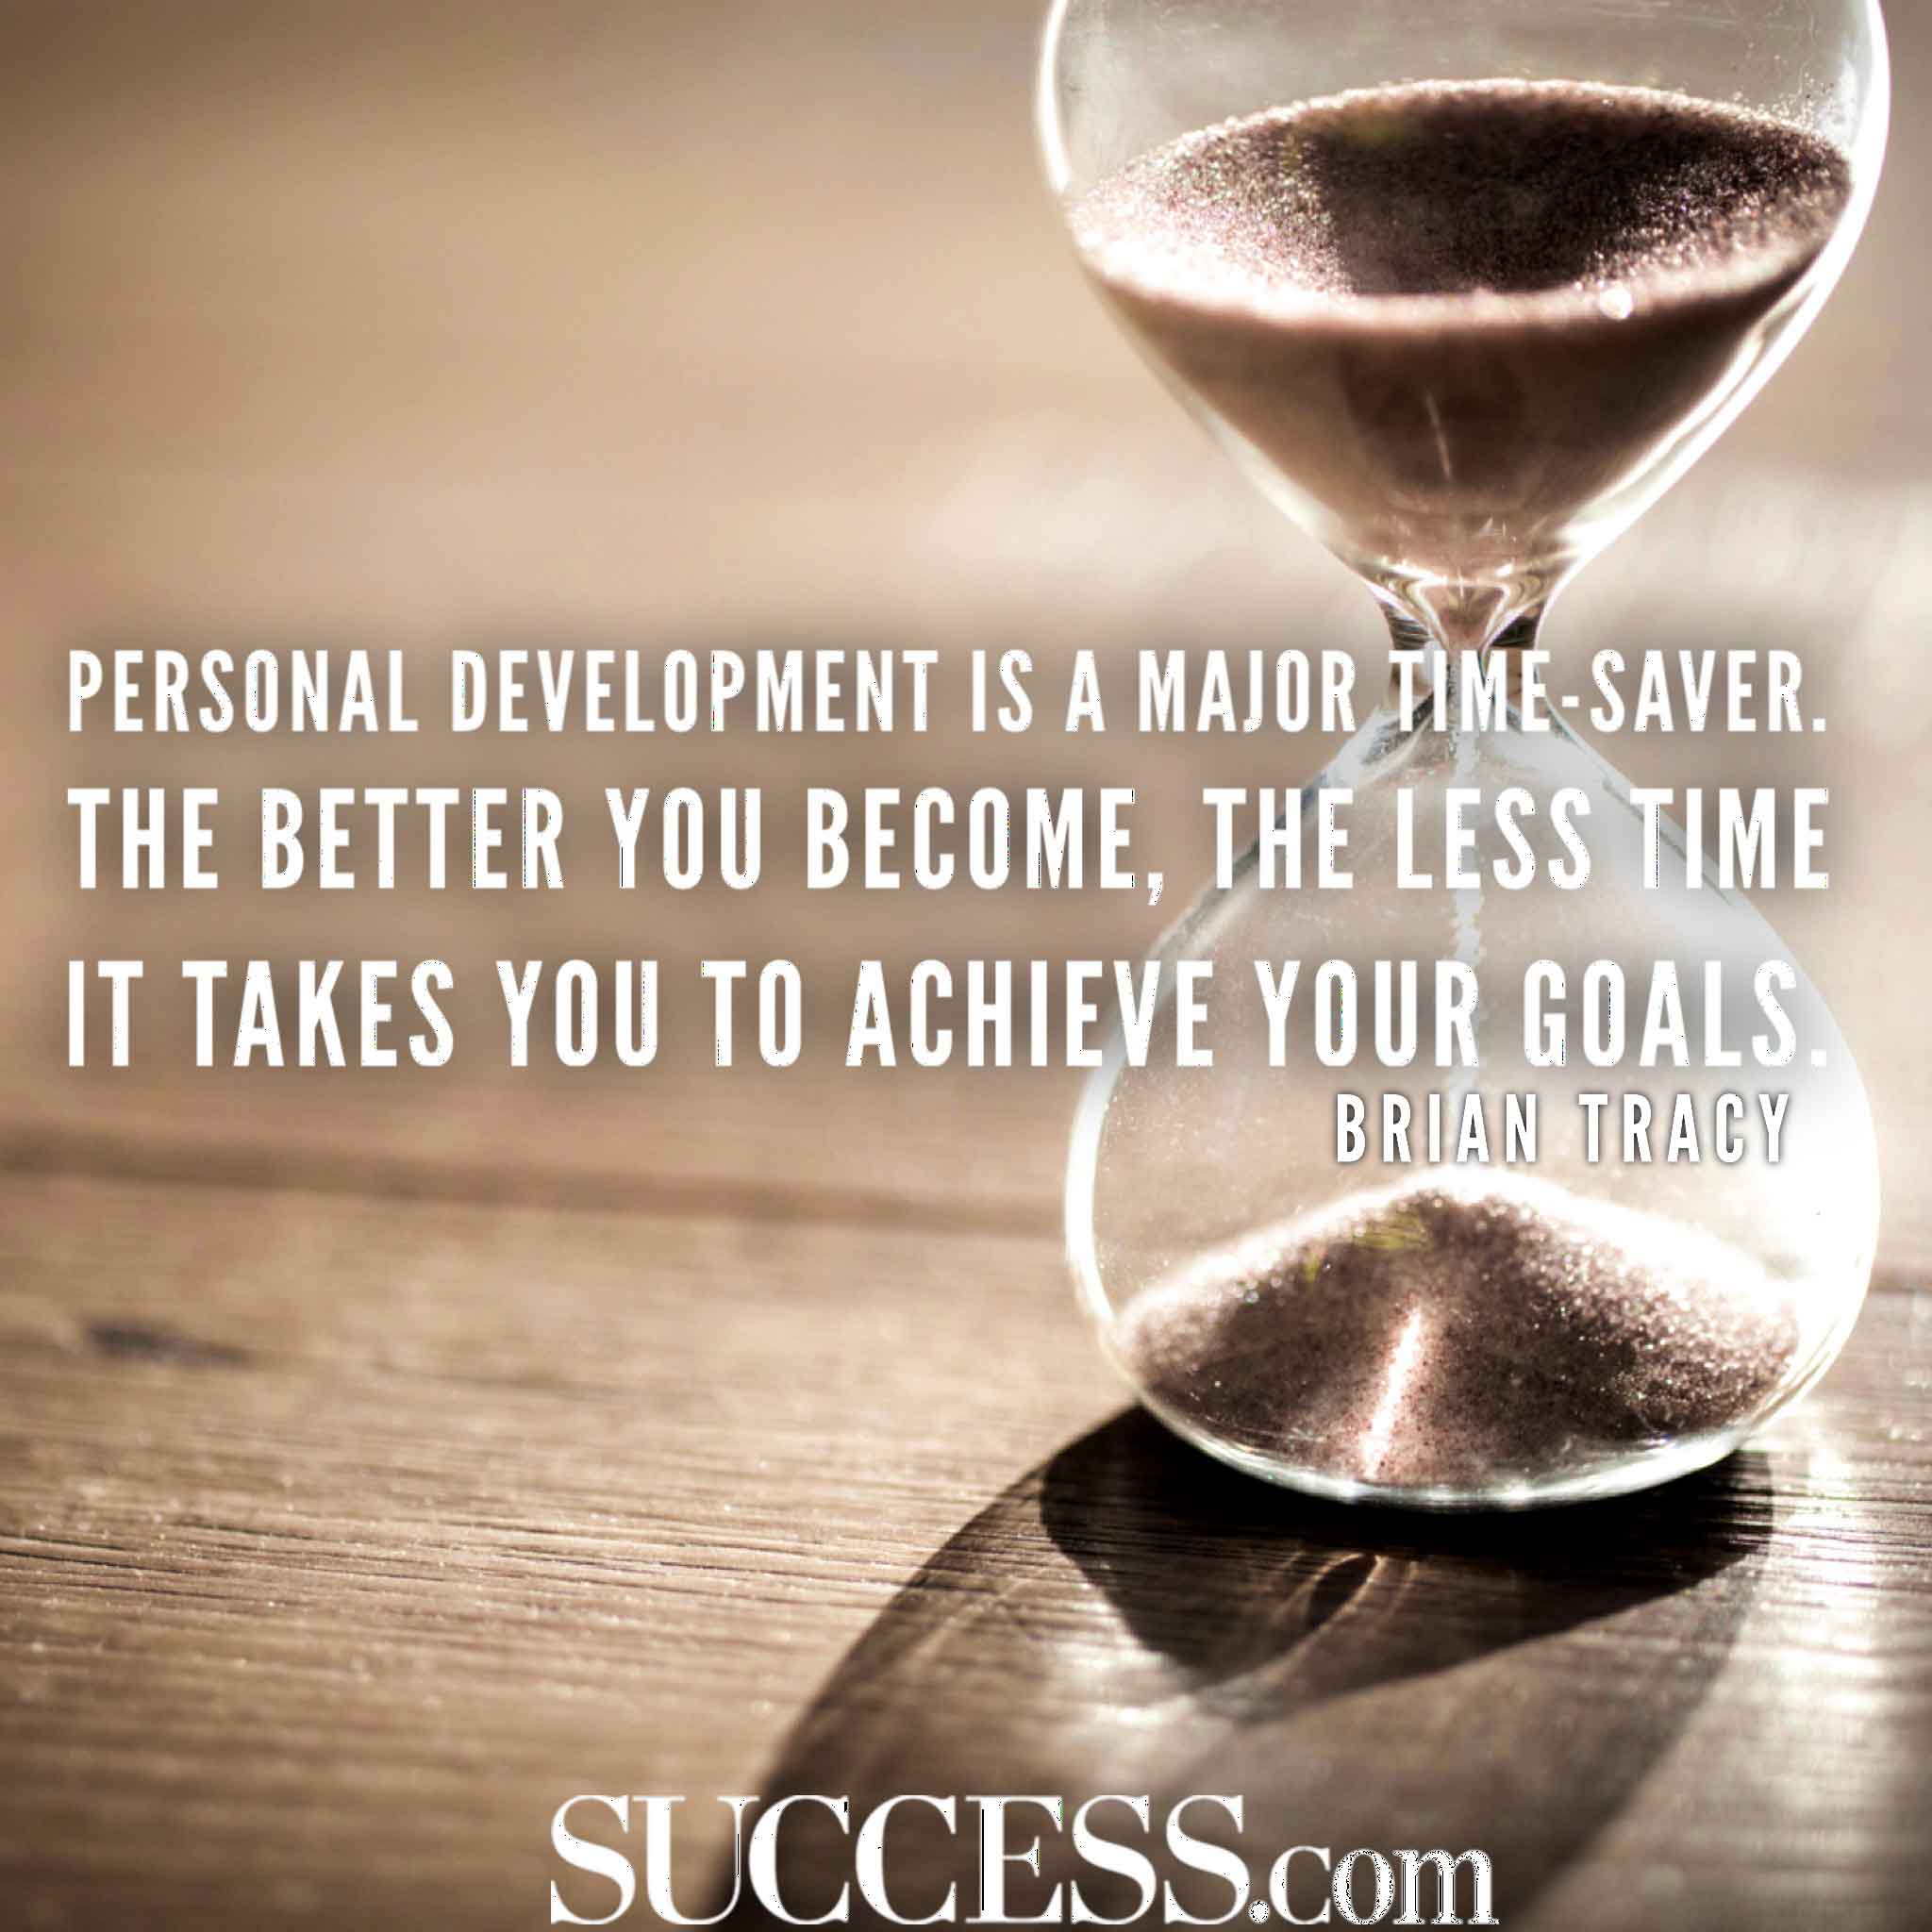 15 Personal Development Quotes to Help You Invest In Yourself